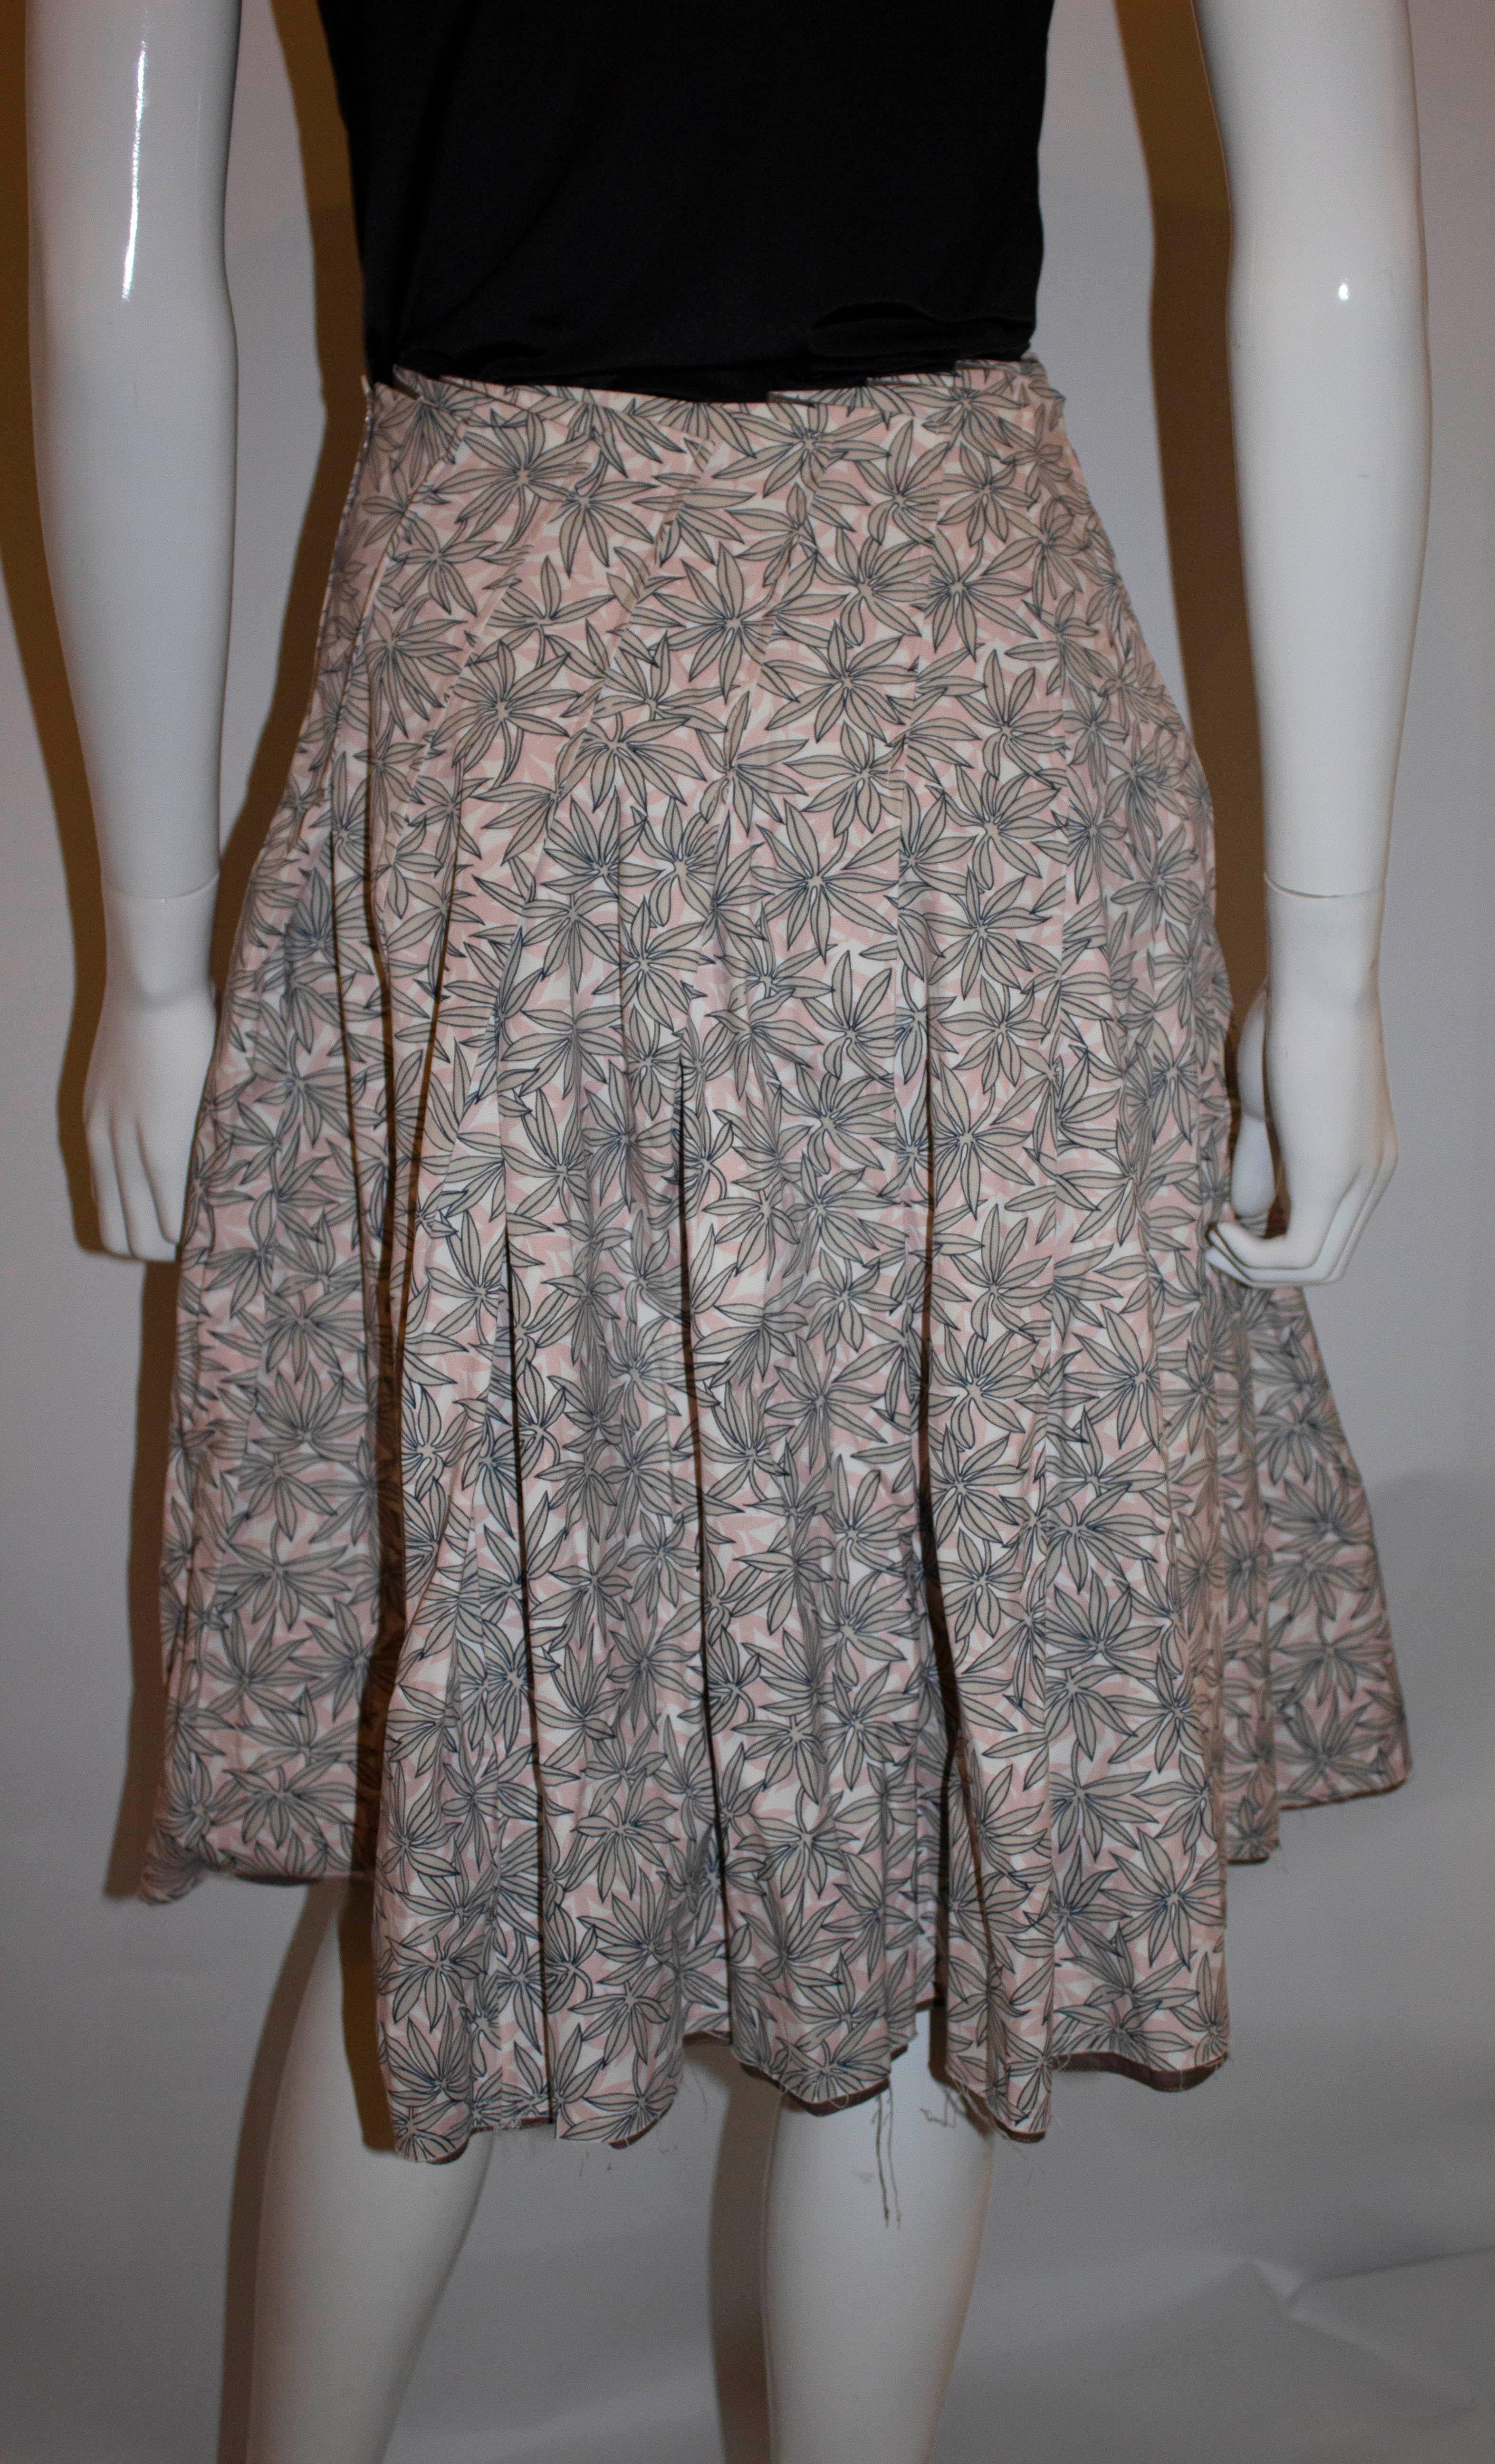 Marni Cotton Skirt In Good Condition For Sale In London, GB